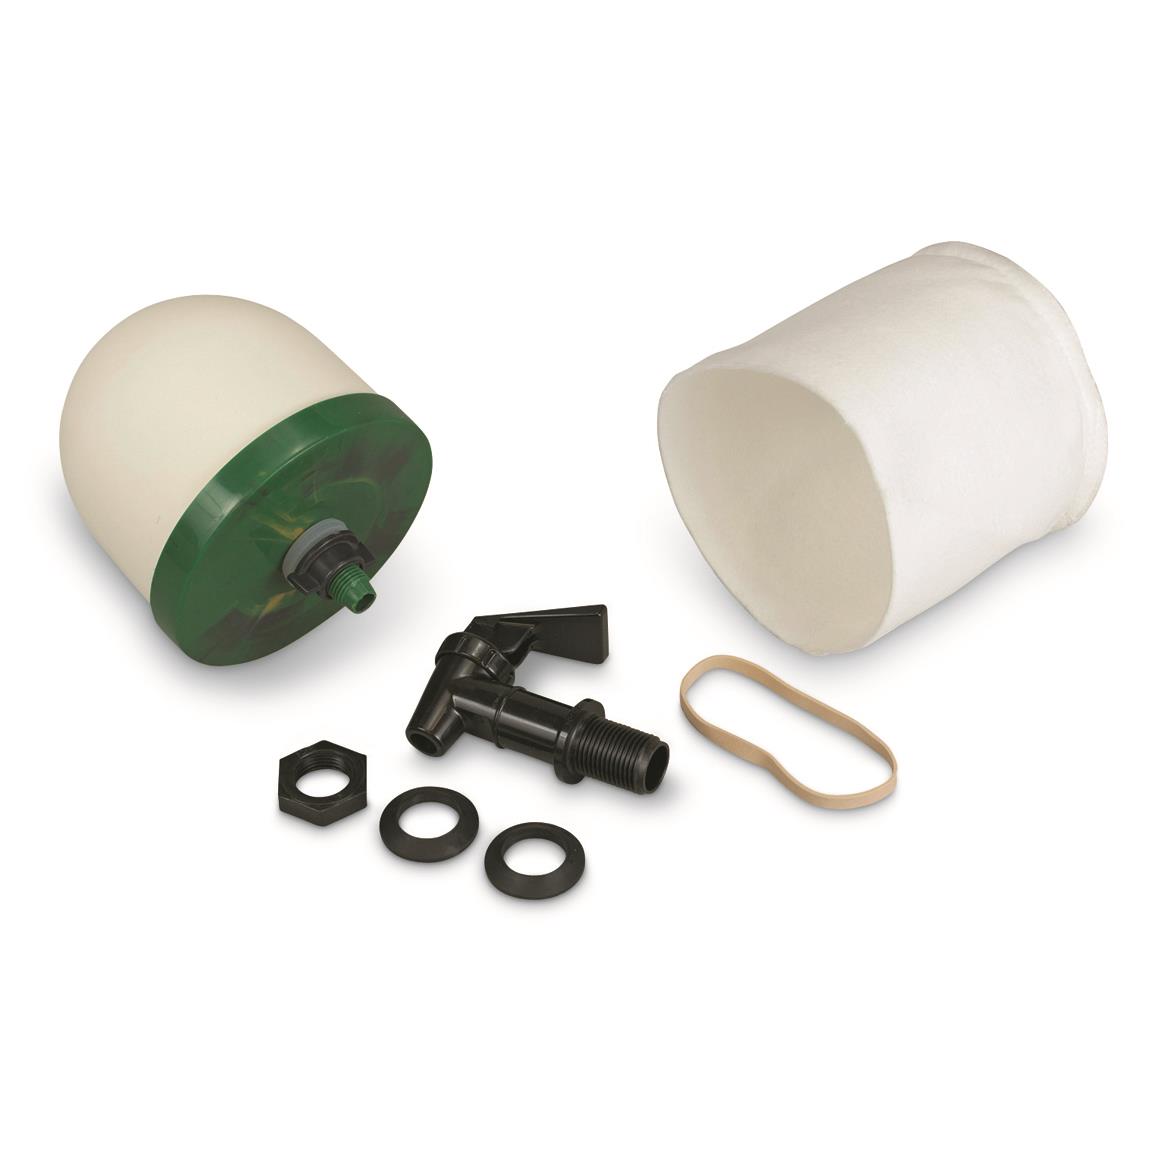 Includes filter, filter sock, spigot kit and rubber band